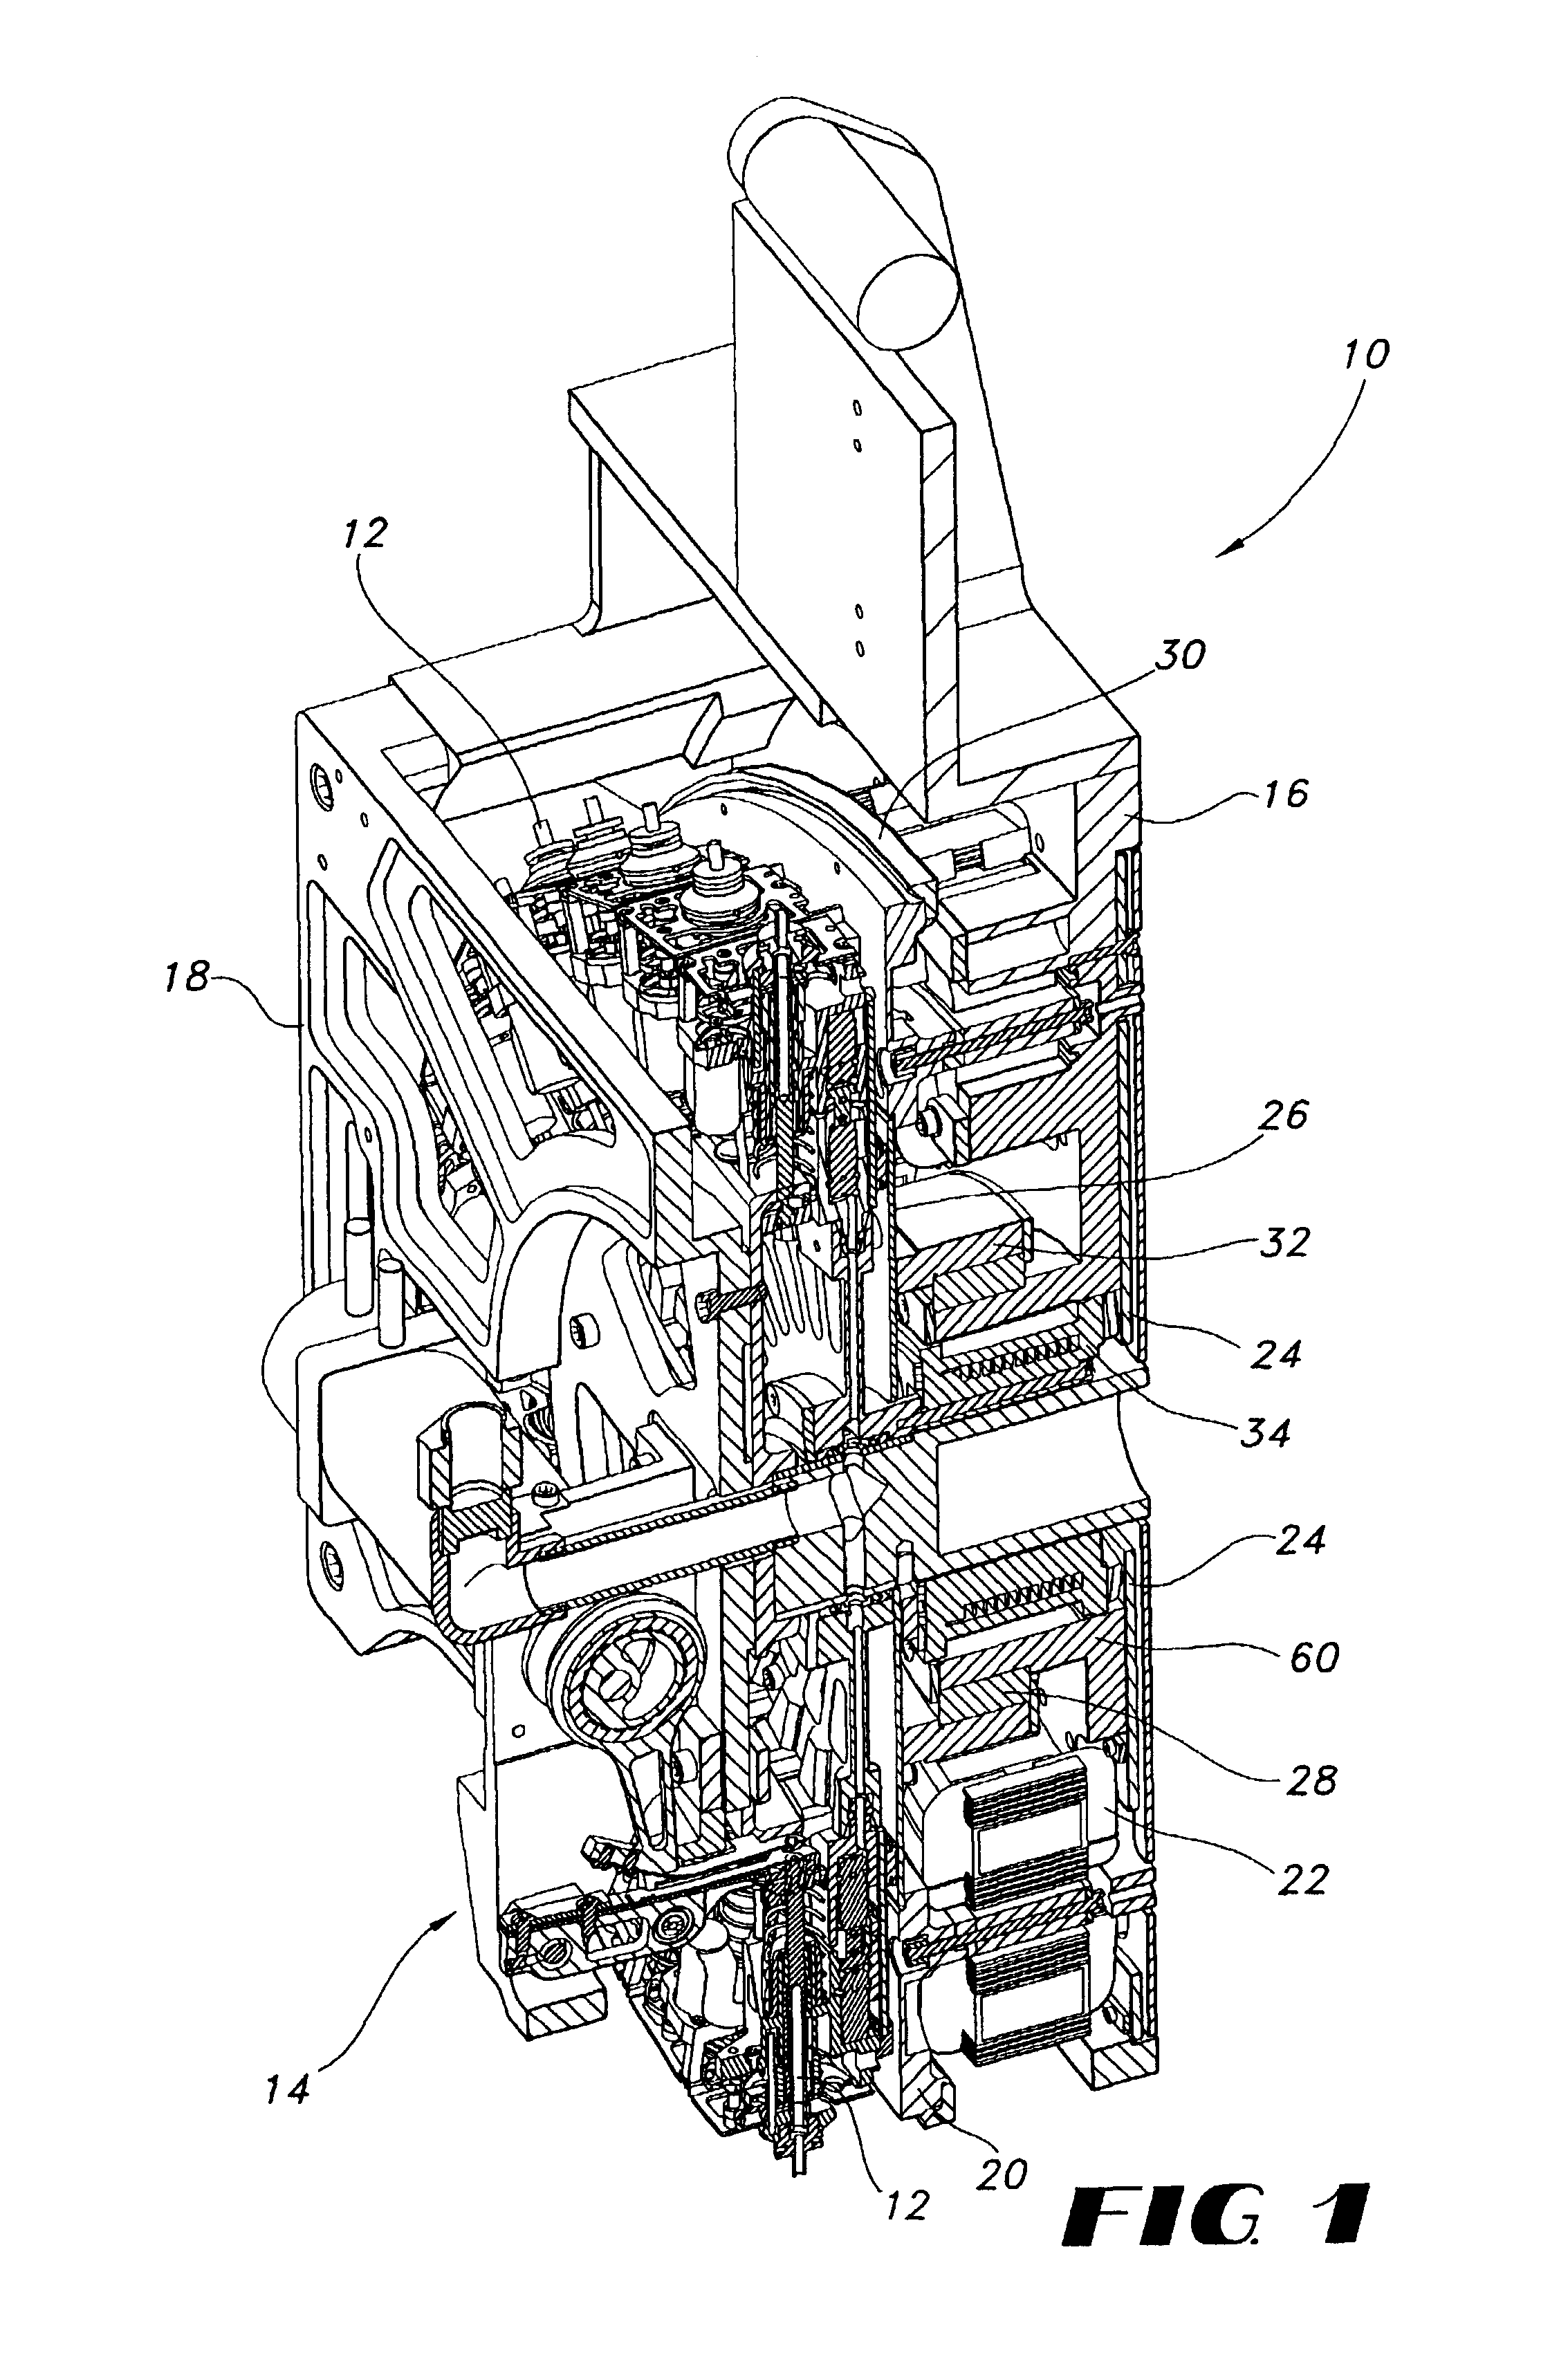 Cabeless interconnect system for pick and place machine